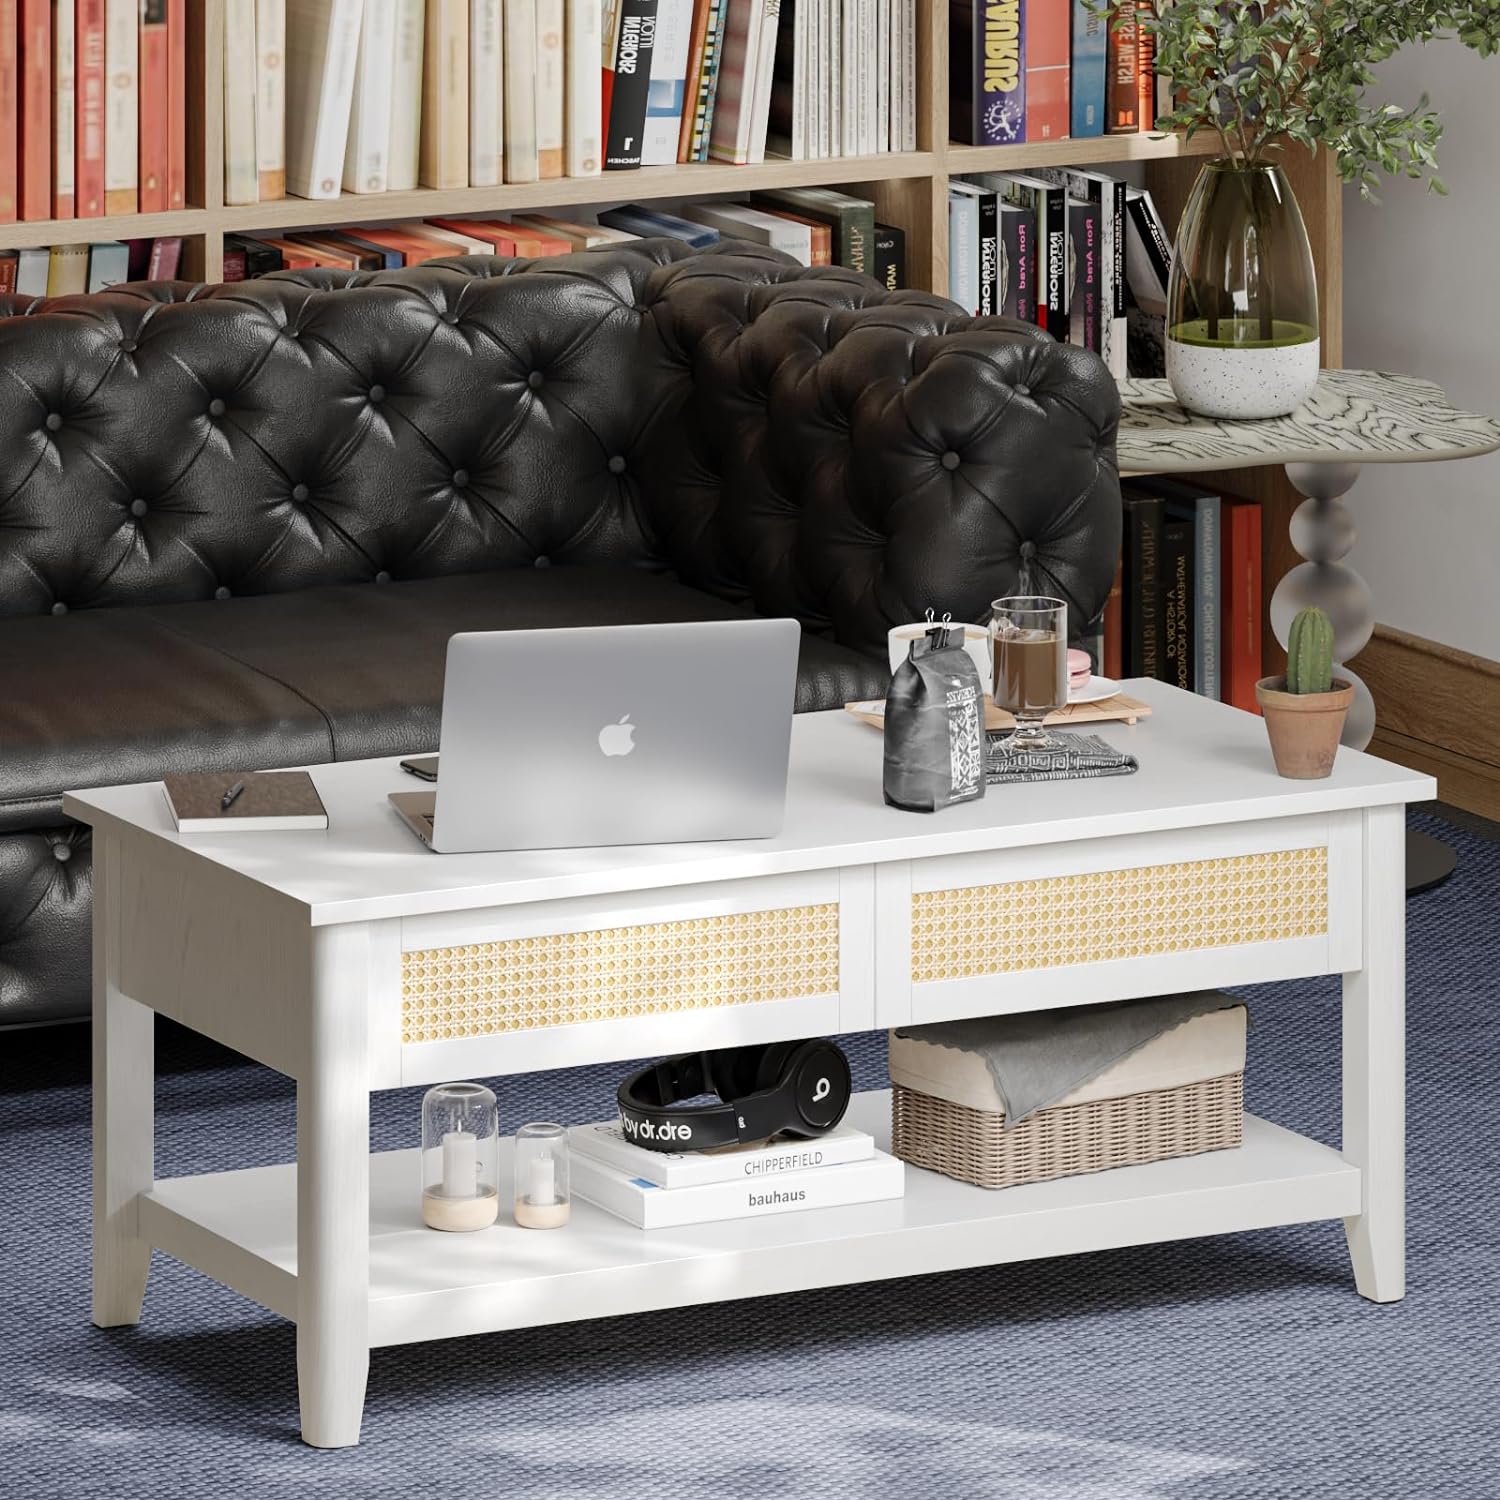 Lift Top Coffee Table, Wooden Coffee Table with Large Hidden Storage Shelf, 42 Lx19 Wx17 H, White